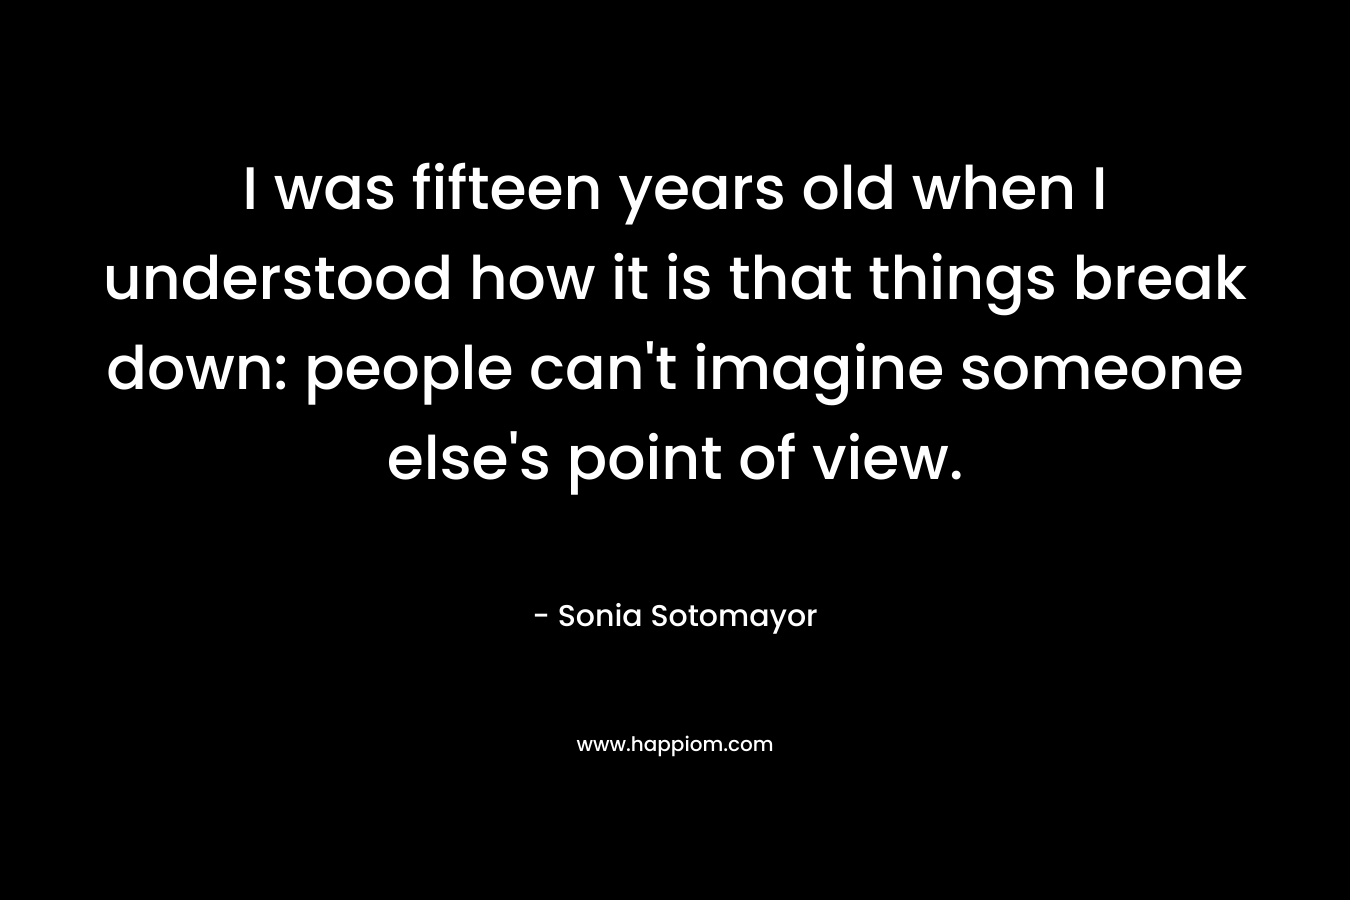 I was fifteen years old when I understood how it is that things break down: people can’t imagine someone else’s point of view. – Sonia Sotomayor